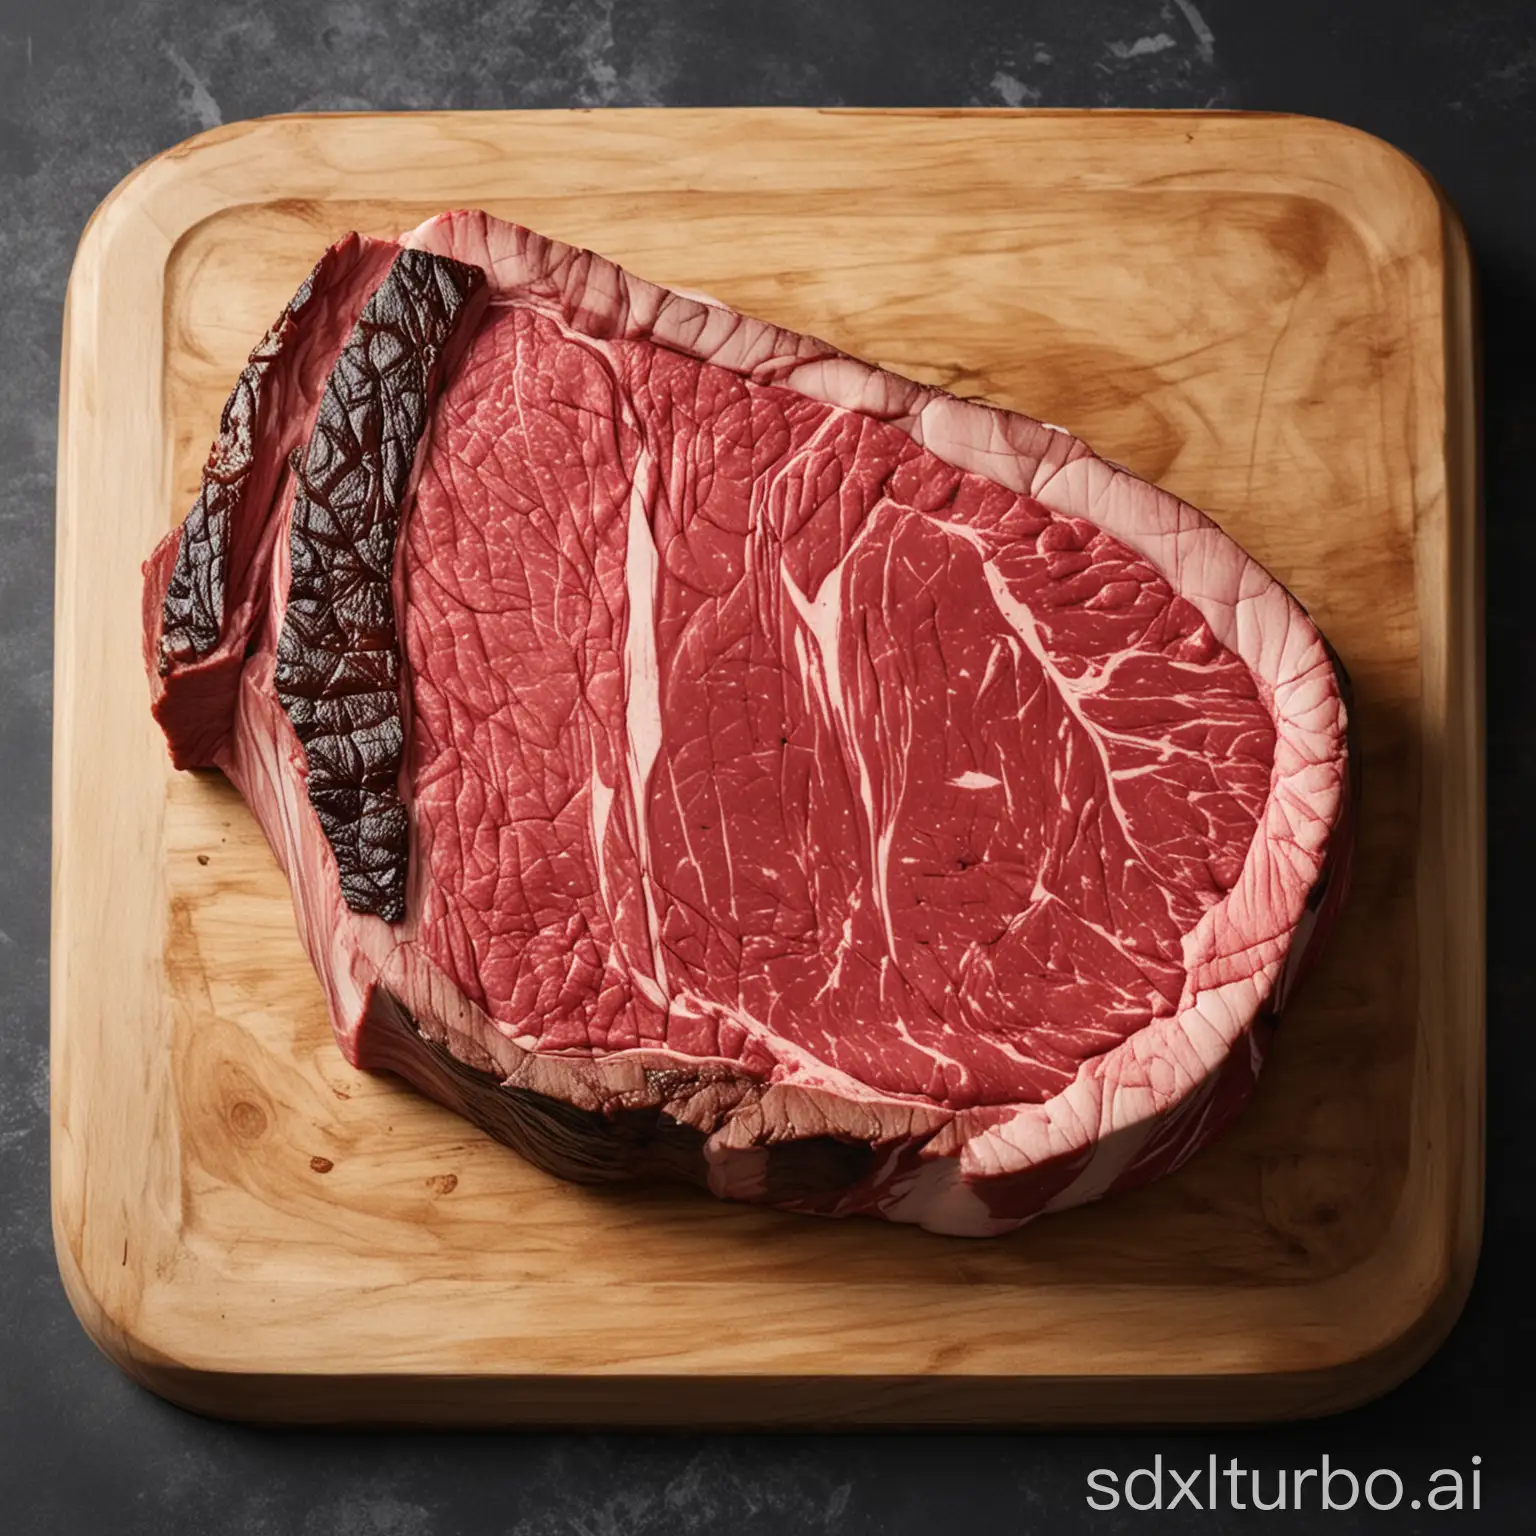 Juicy-Marbled-Steak-Grilling-on-an-Open-Flame